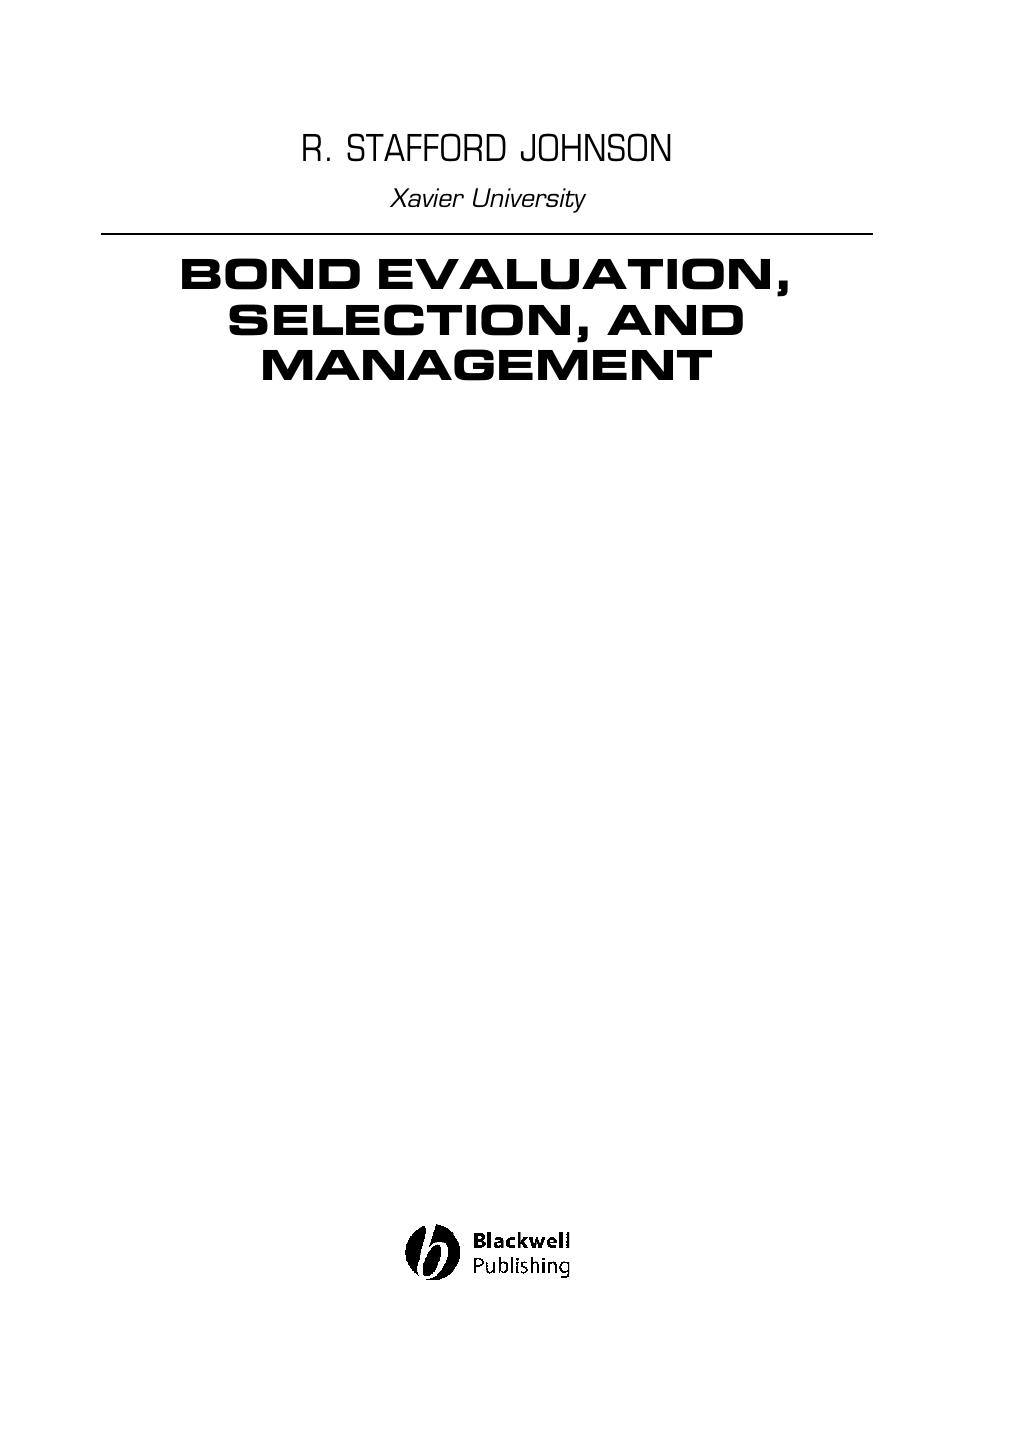 Bond Evaluation, Selection, and Management by R. Stafford Johnson